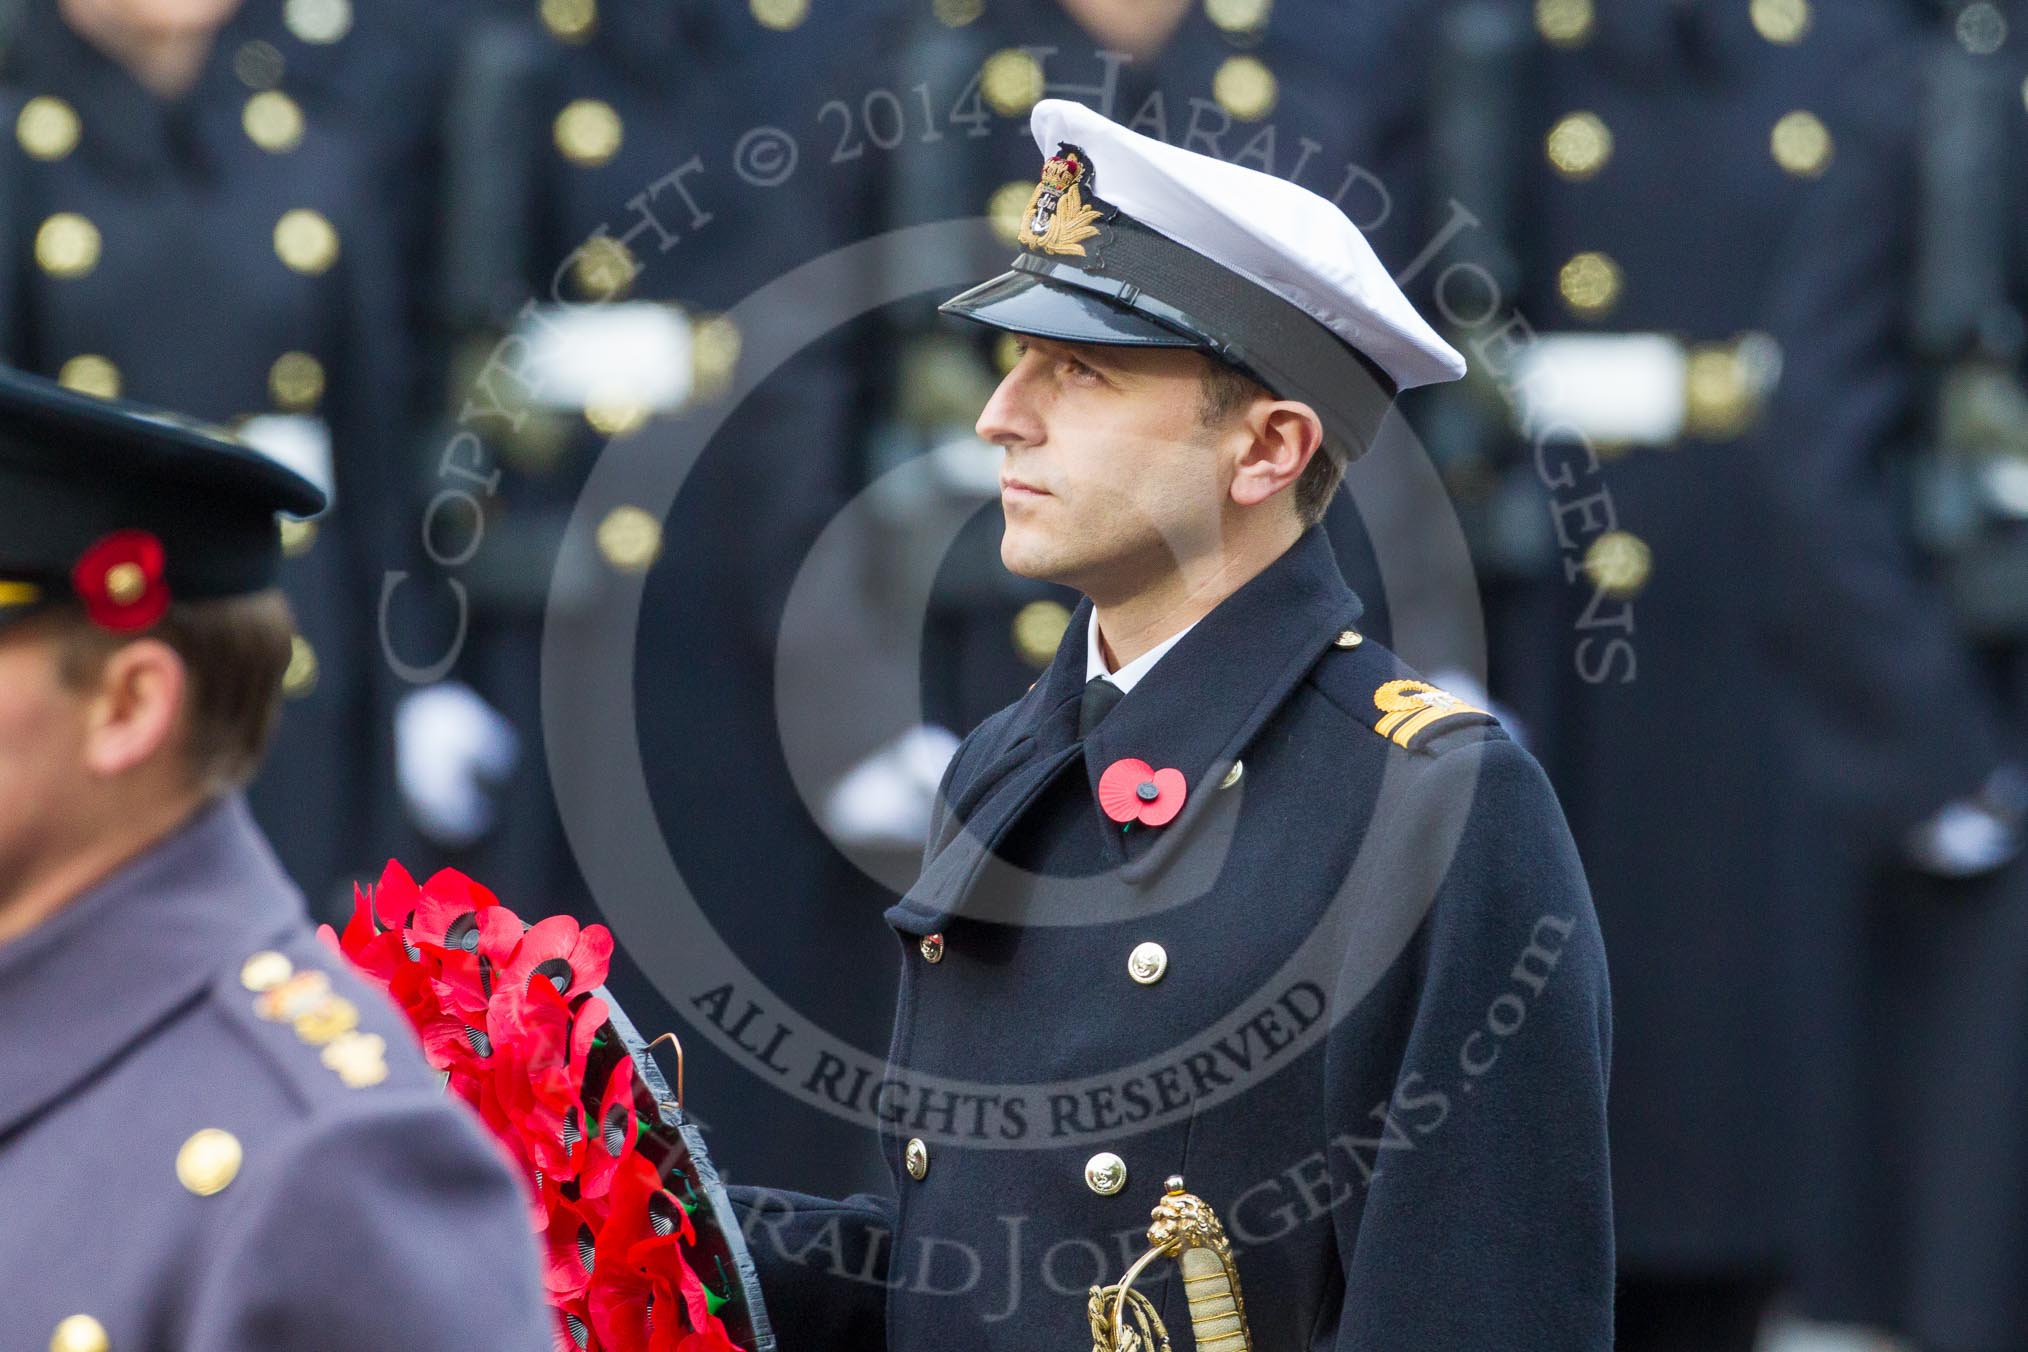 Remembrance Sunday at the Cenotaph in London 2014: Lieutenant Jack Cooper, Royal Navy, equerry to HRH The Duke of York.
Press stand opposite the Foreign Office building, Whitehall, London SW1,
London,
Greater London,
United Kingdom,
on 09 November 2014 at 10:59, image #154